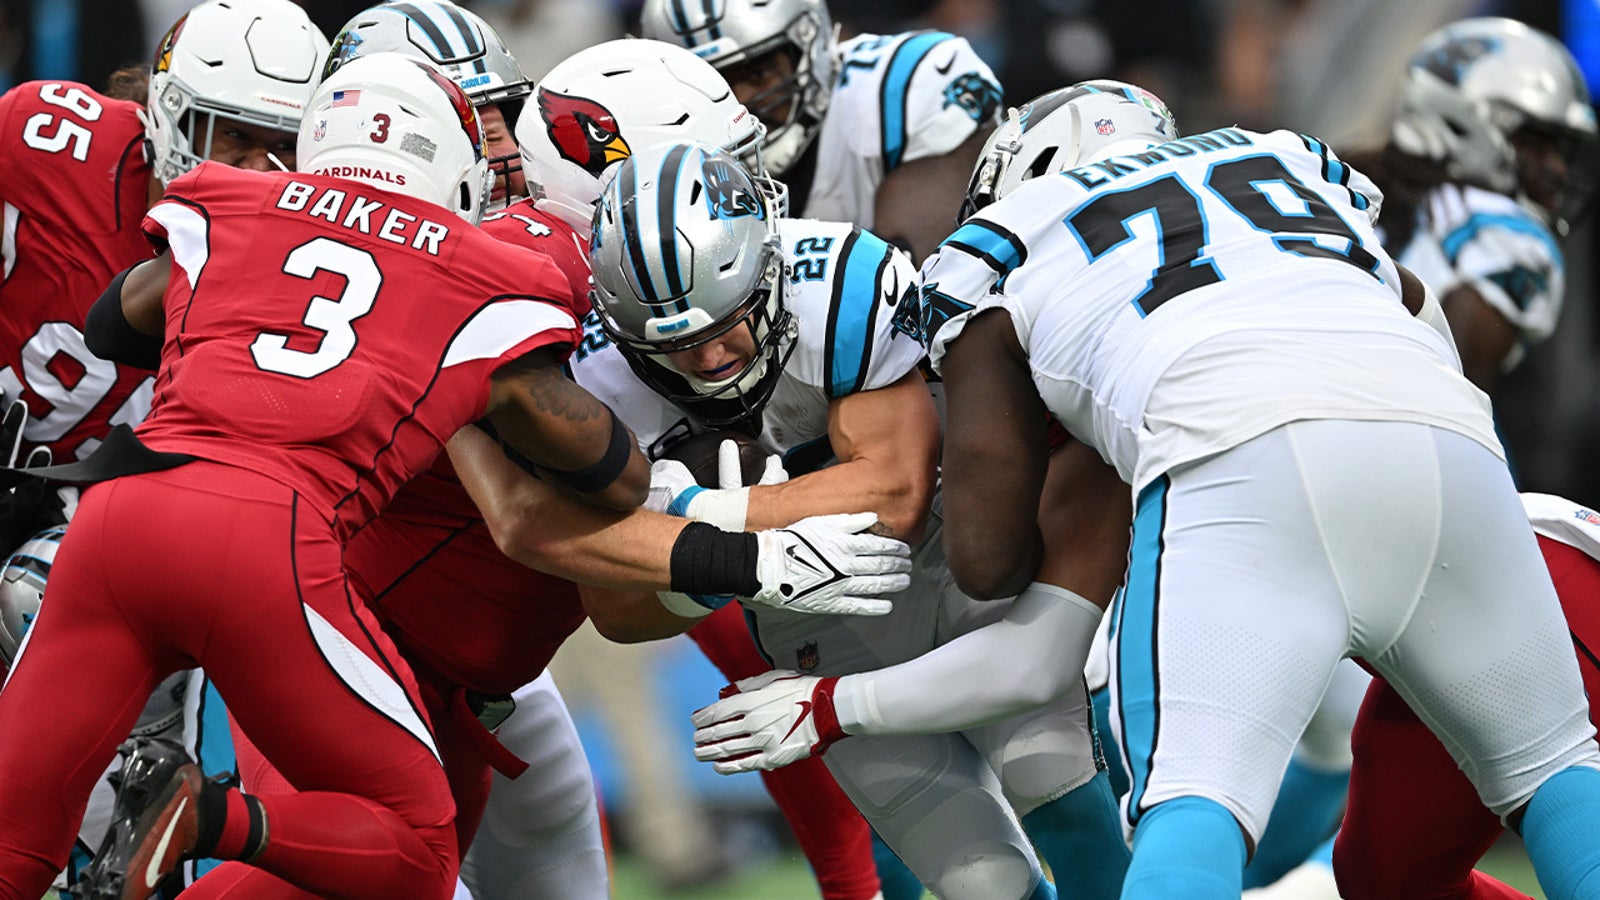 Cardinals' defense forces three turnovers in victory over Panthers